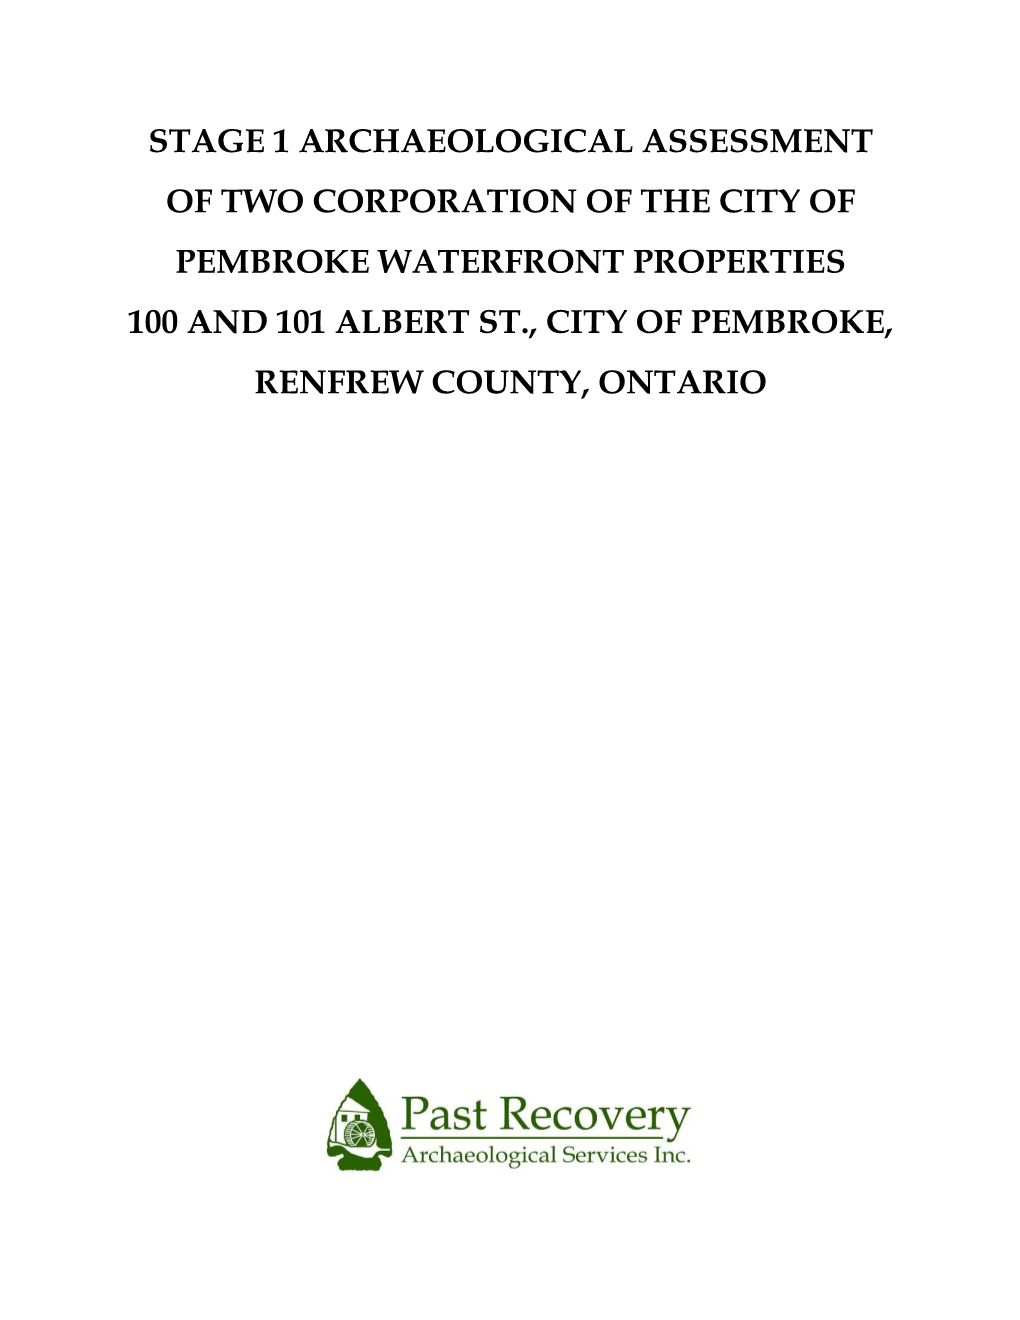 Stage 1 Archaeological Assessment of Two Corporation of the City of Pembroke Waterfront Properties 100 and 101 Albert St., City of Pembroke, Renfrew County, Ontario